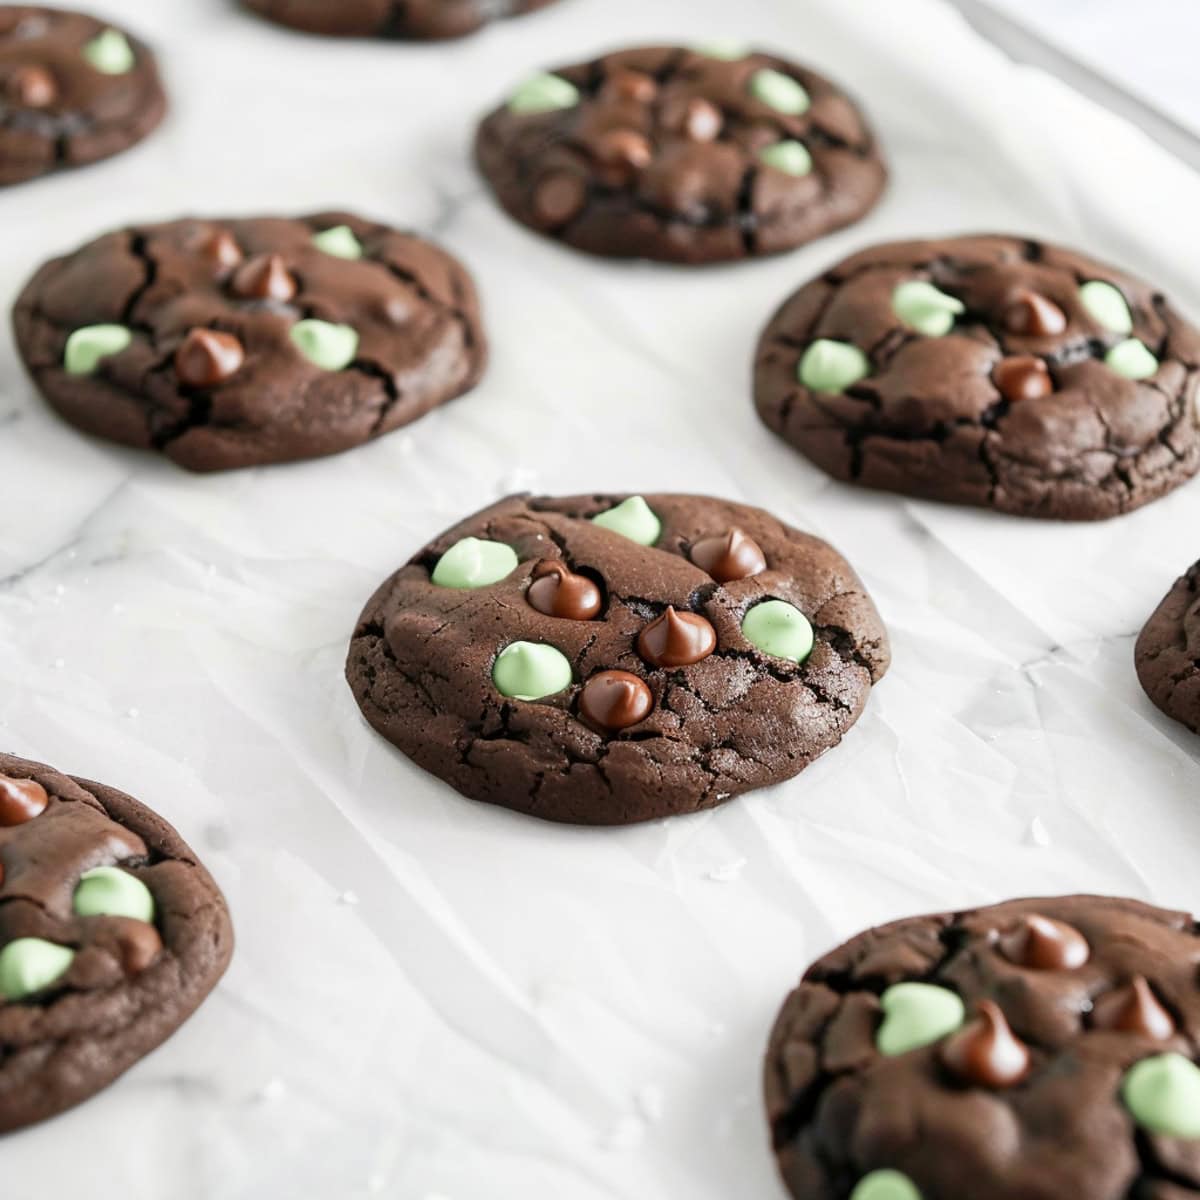 A close-up shot of freshly baked chocolate mint chip cookies on a white parchment paper.